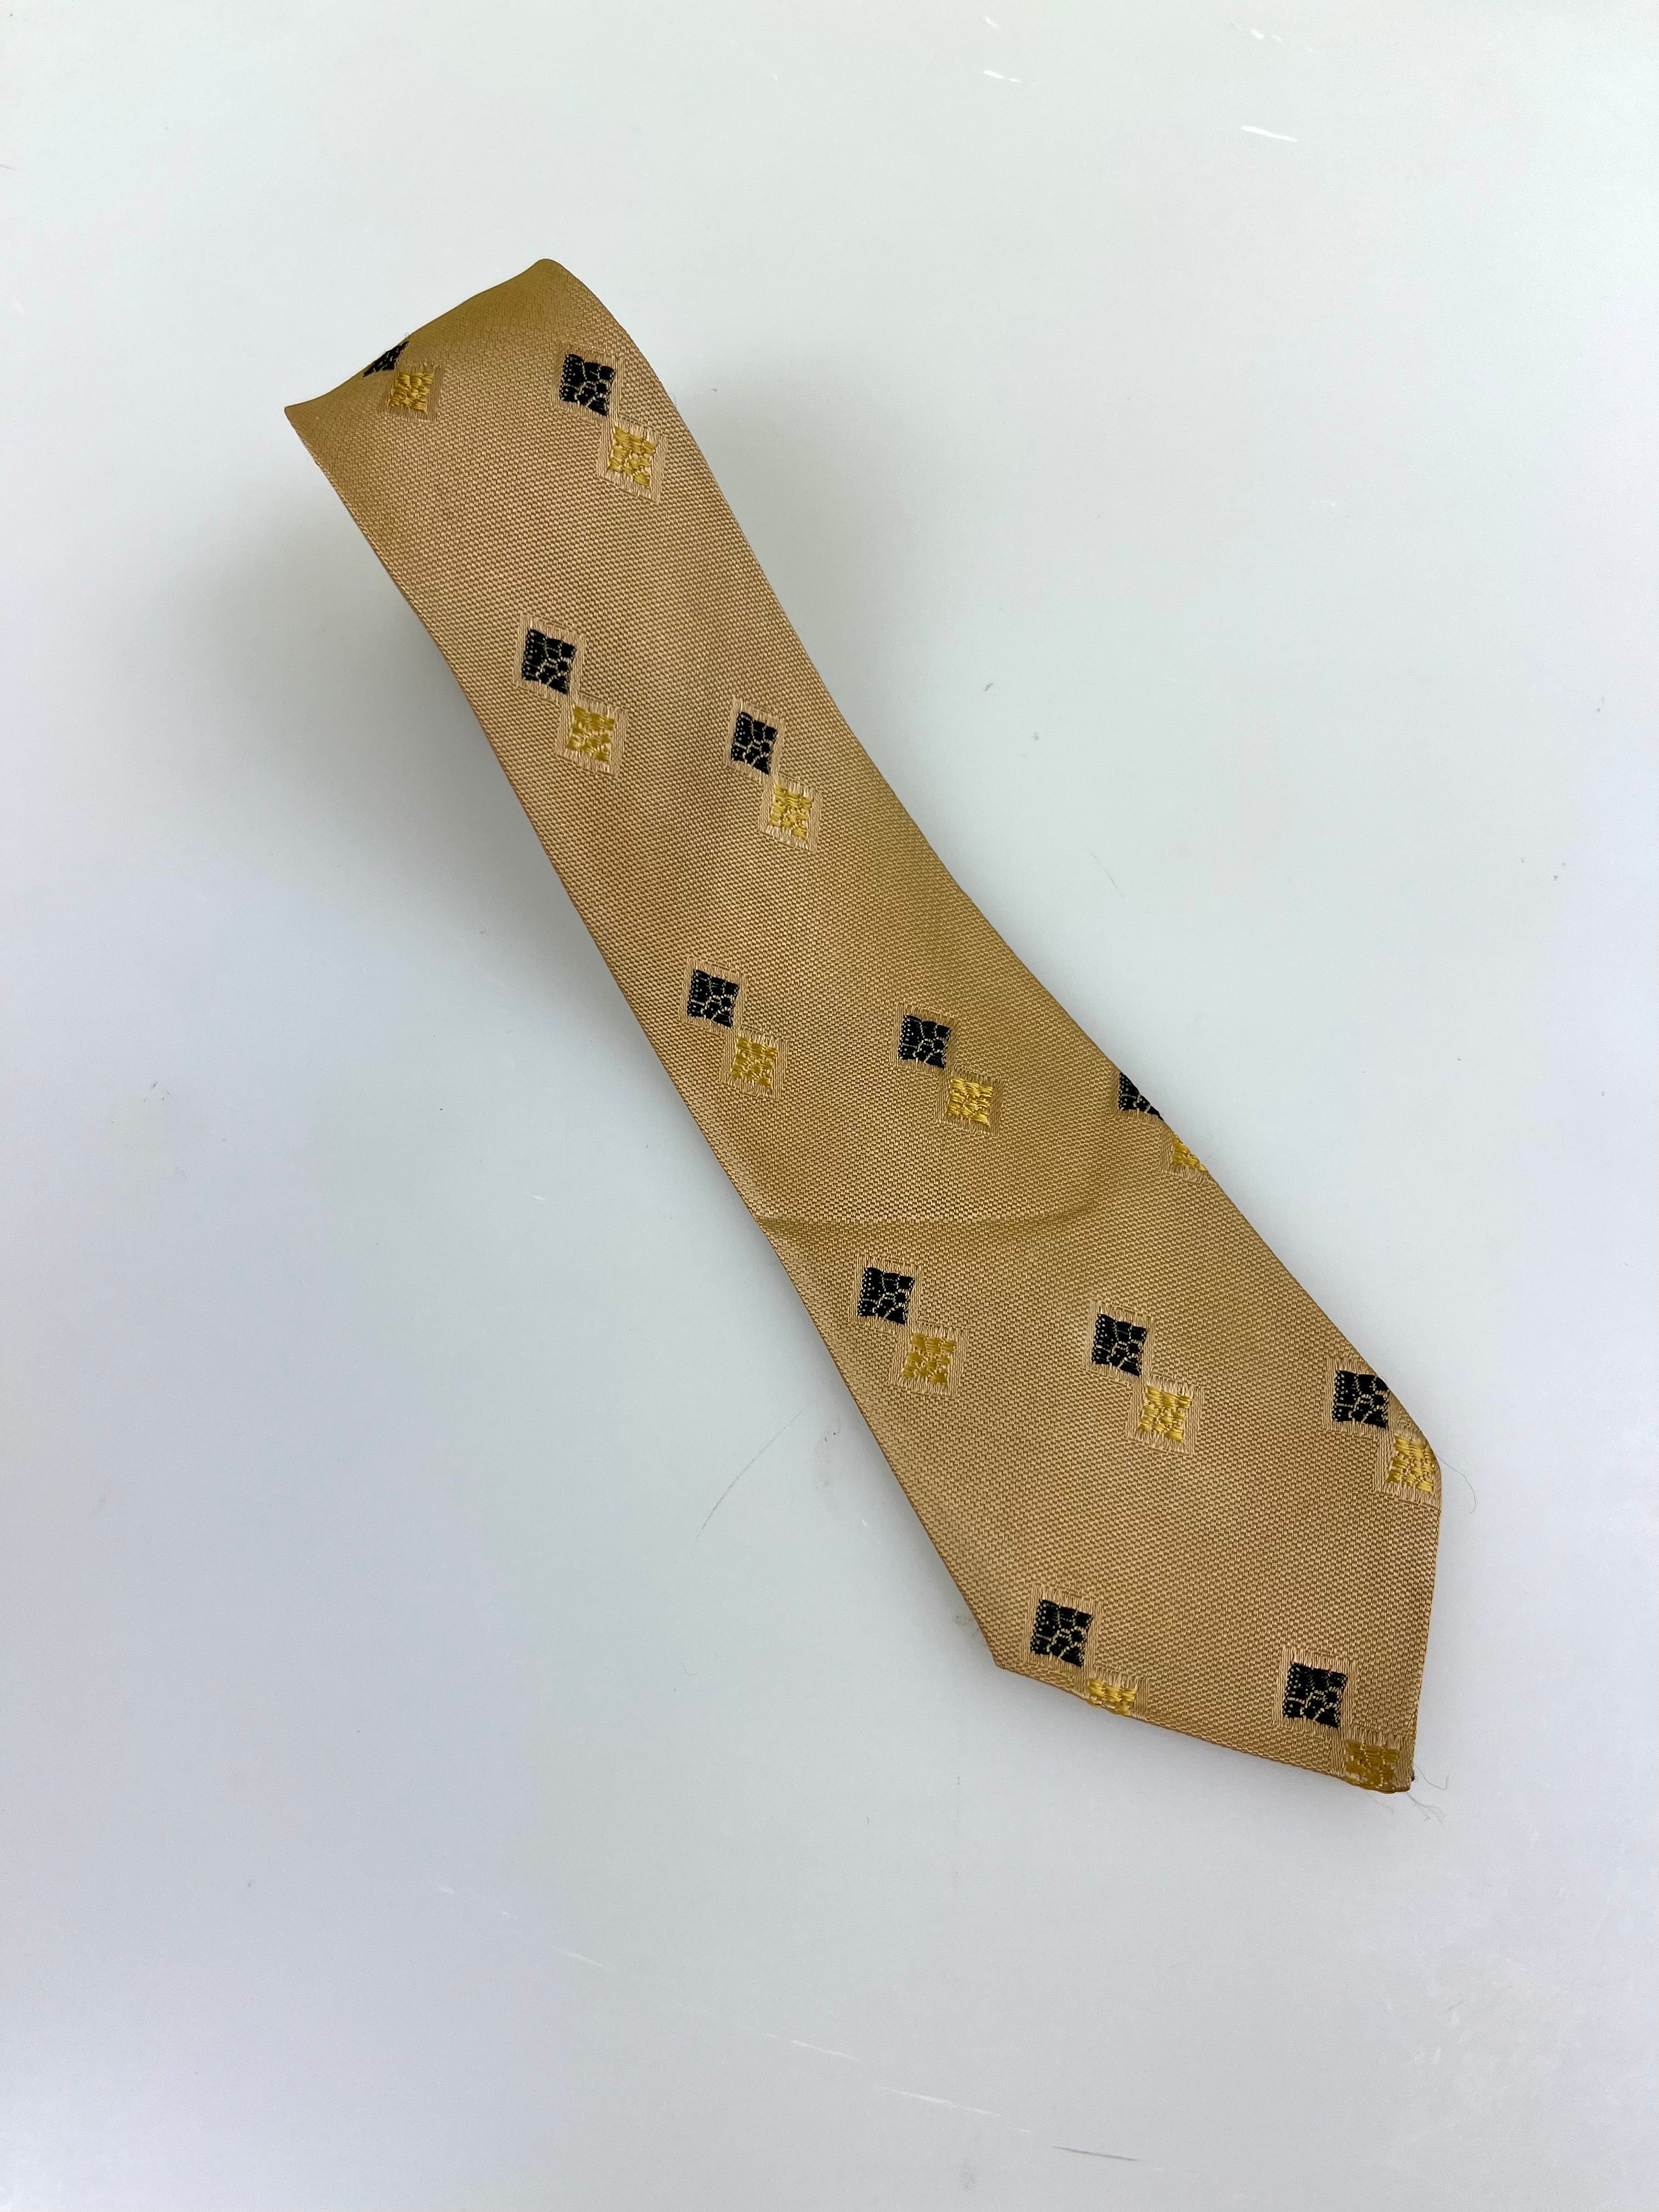 Tan Tie with Gold and Black Diamonds